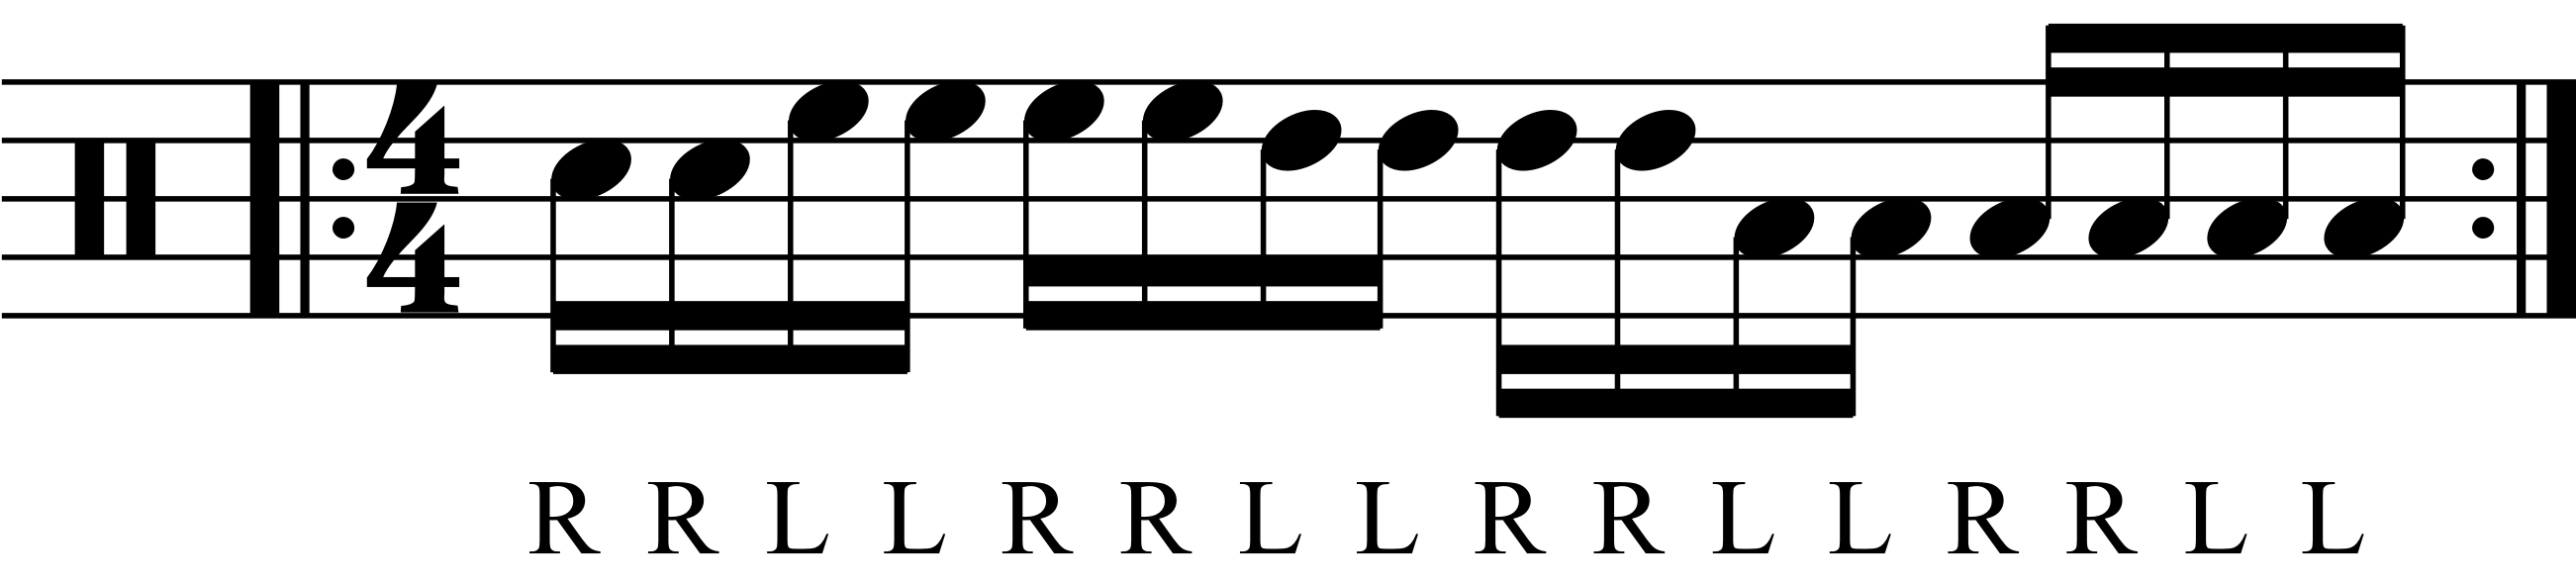 Free rudiment lesson using staggered groups of four.